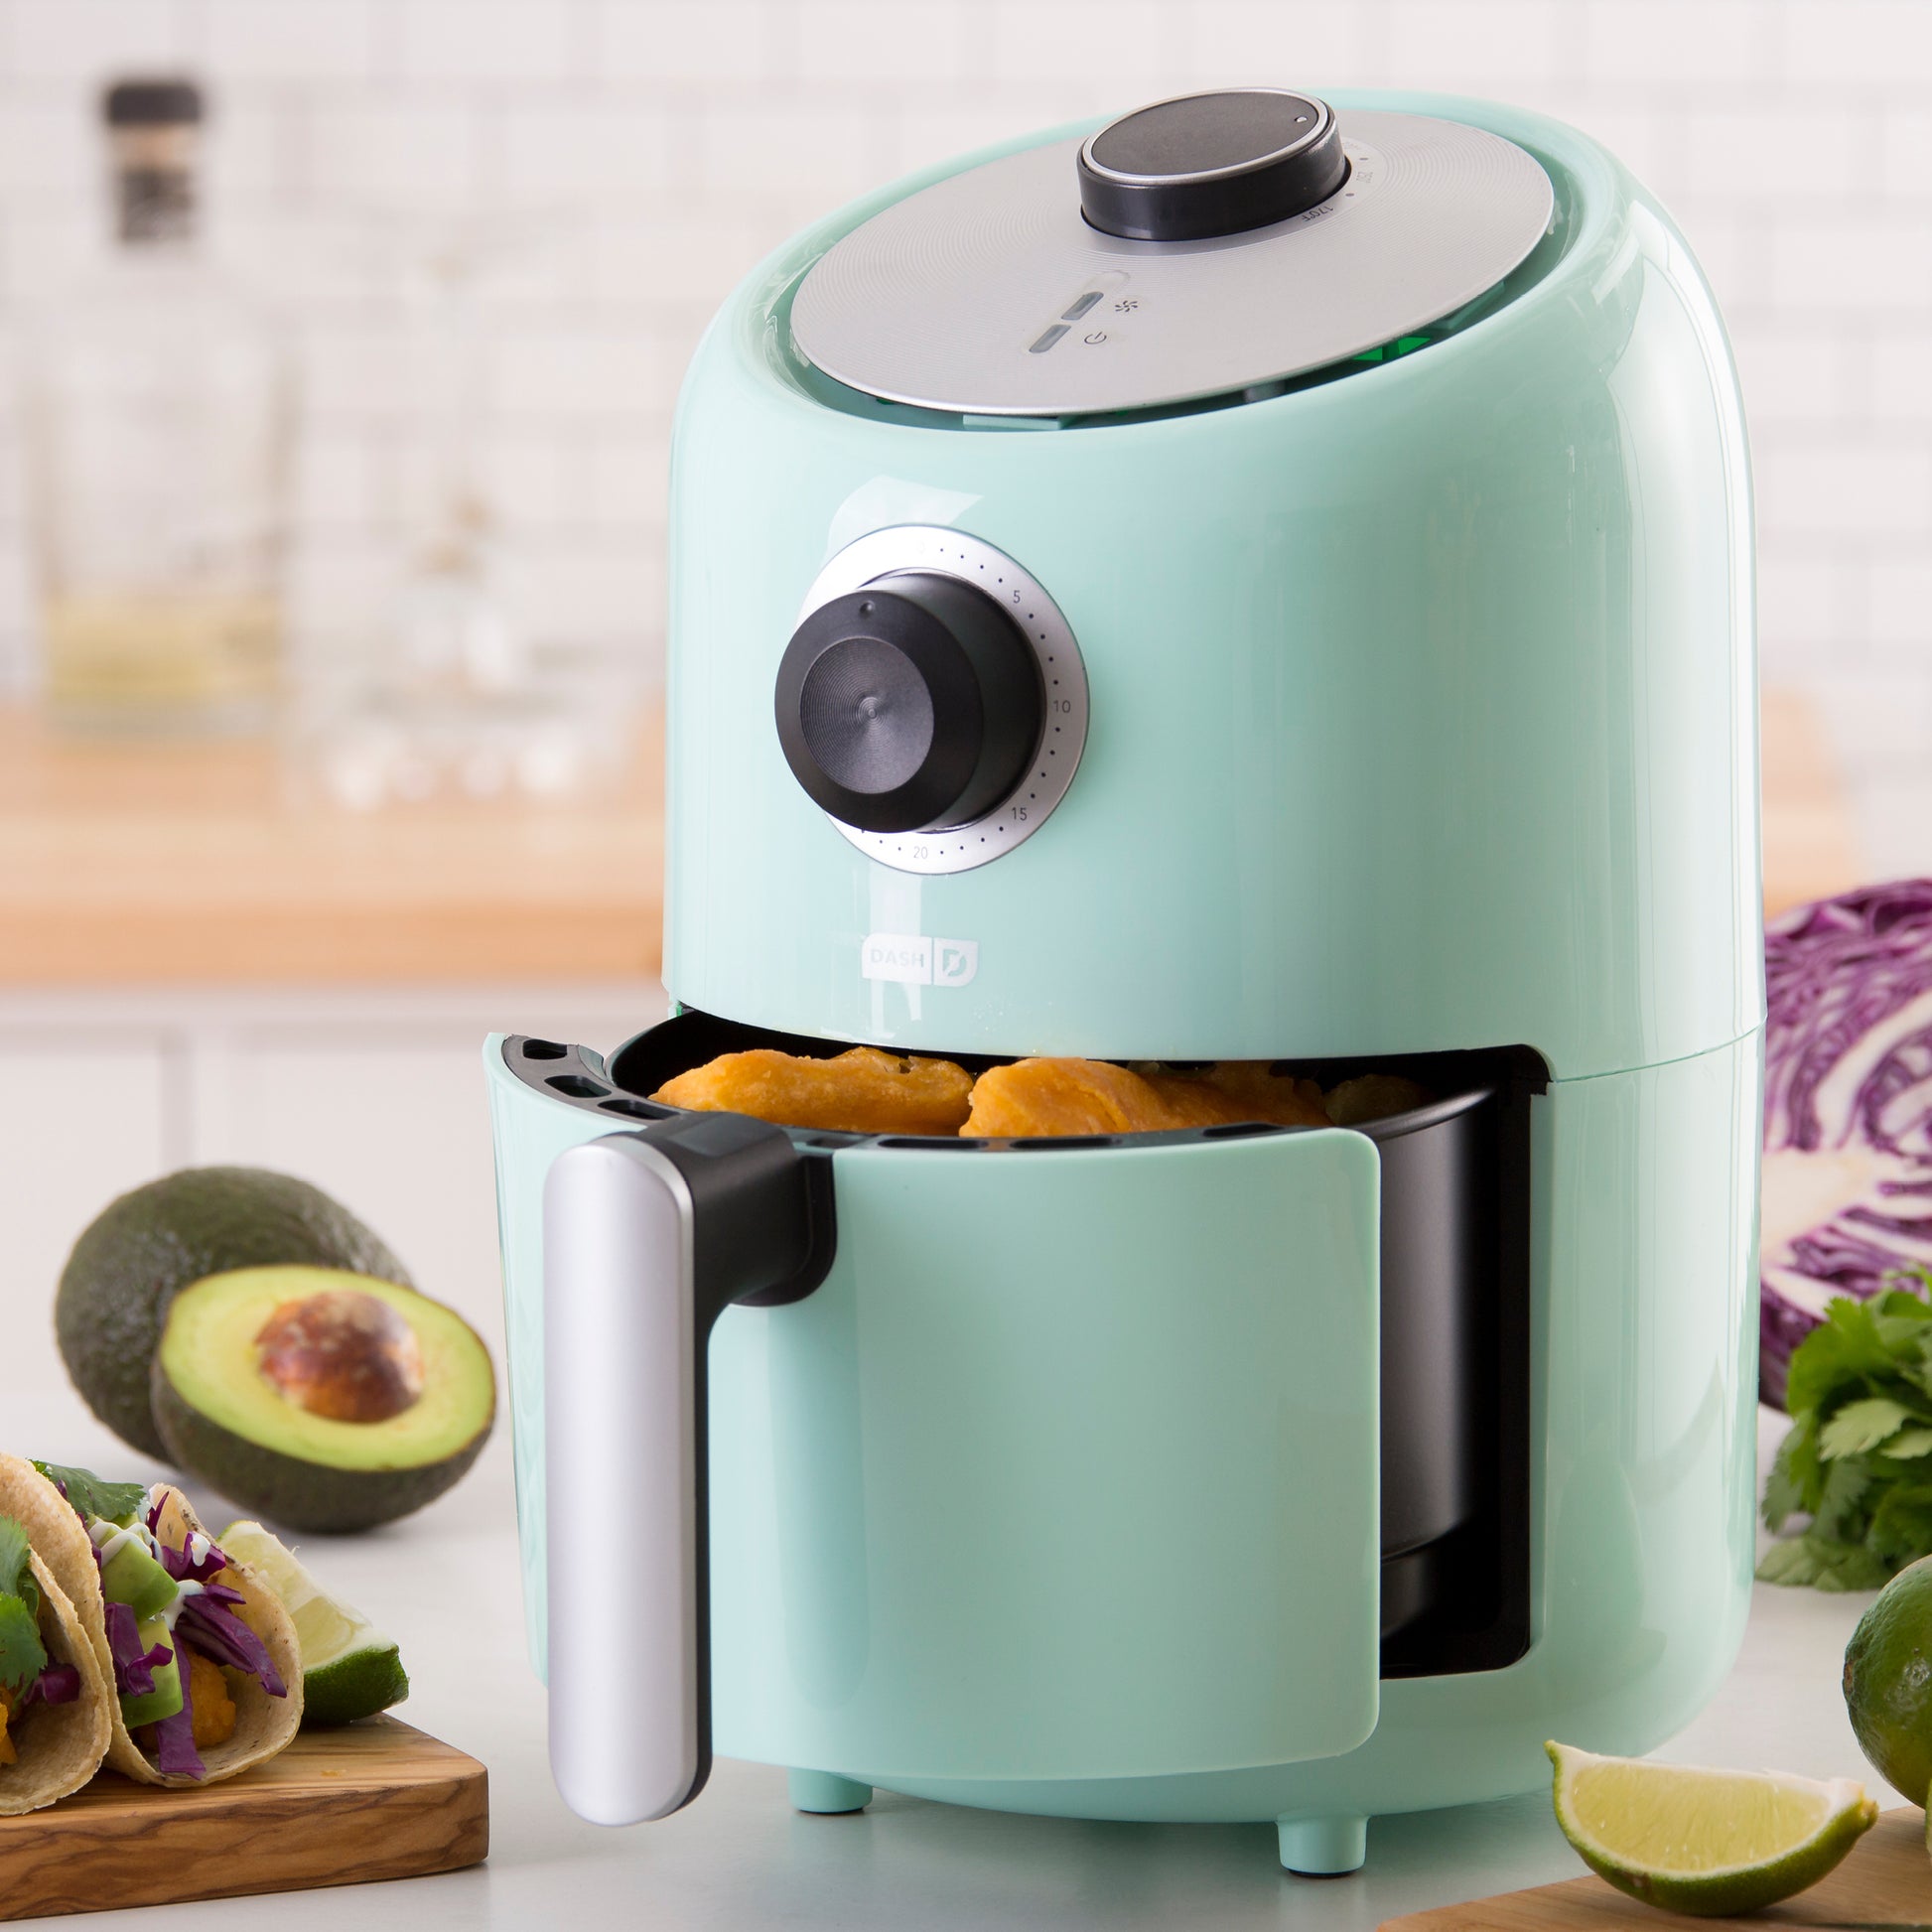 Dash DCAF150UP1 Accessory Air Fryer, Compact